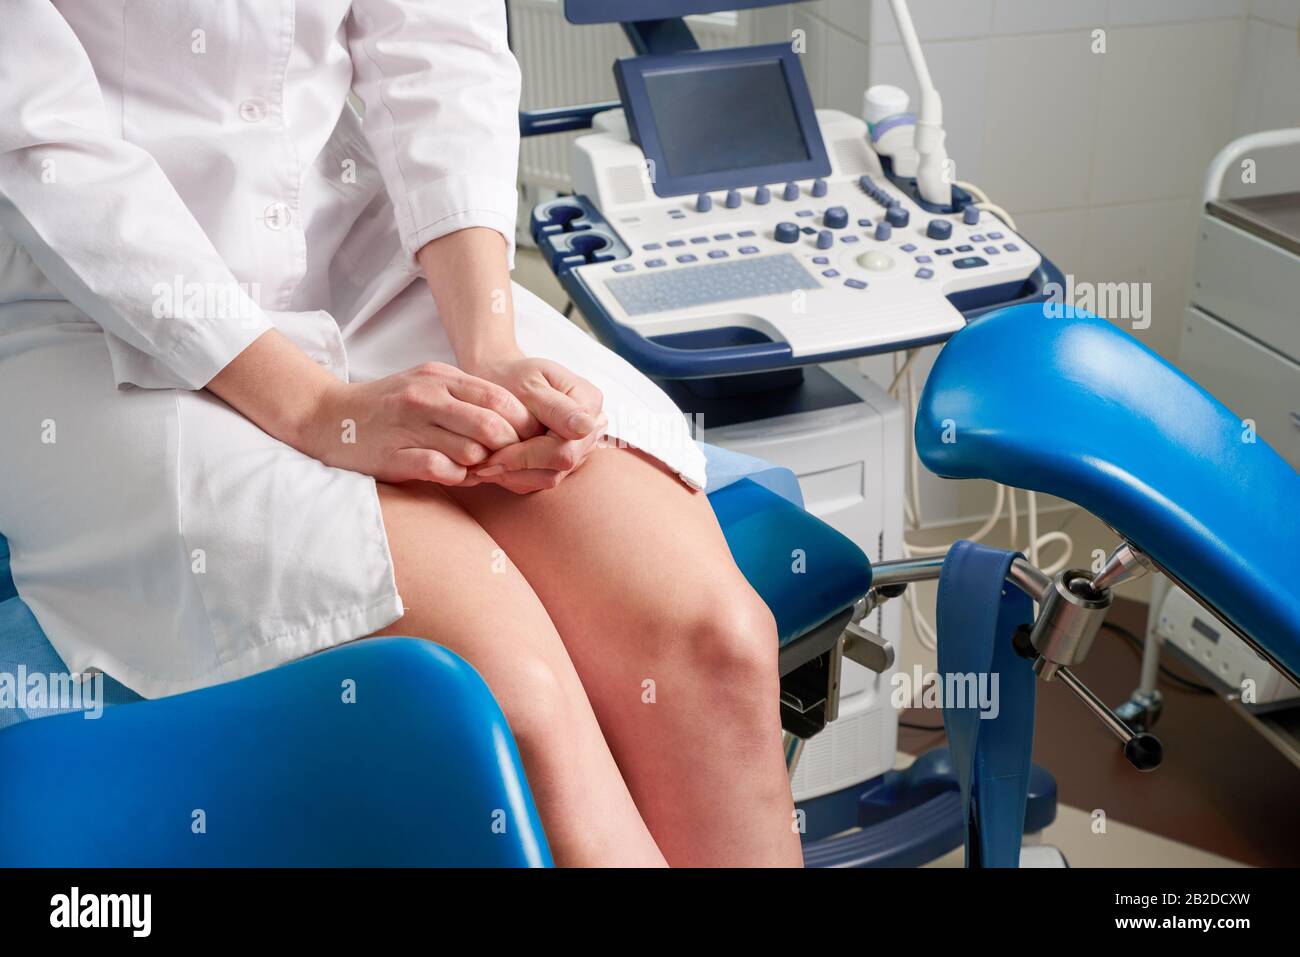 Woman At Gynecologist Office Sitting And Waiting For A Doctor With Test